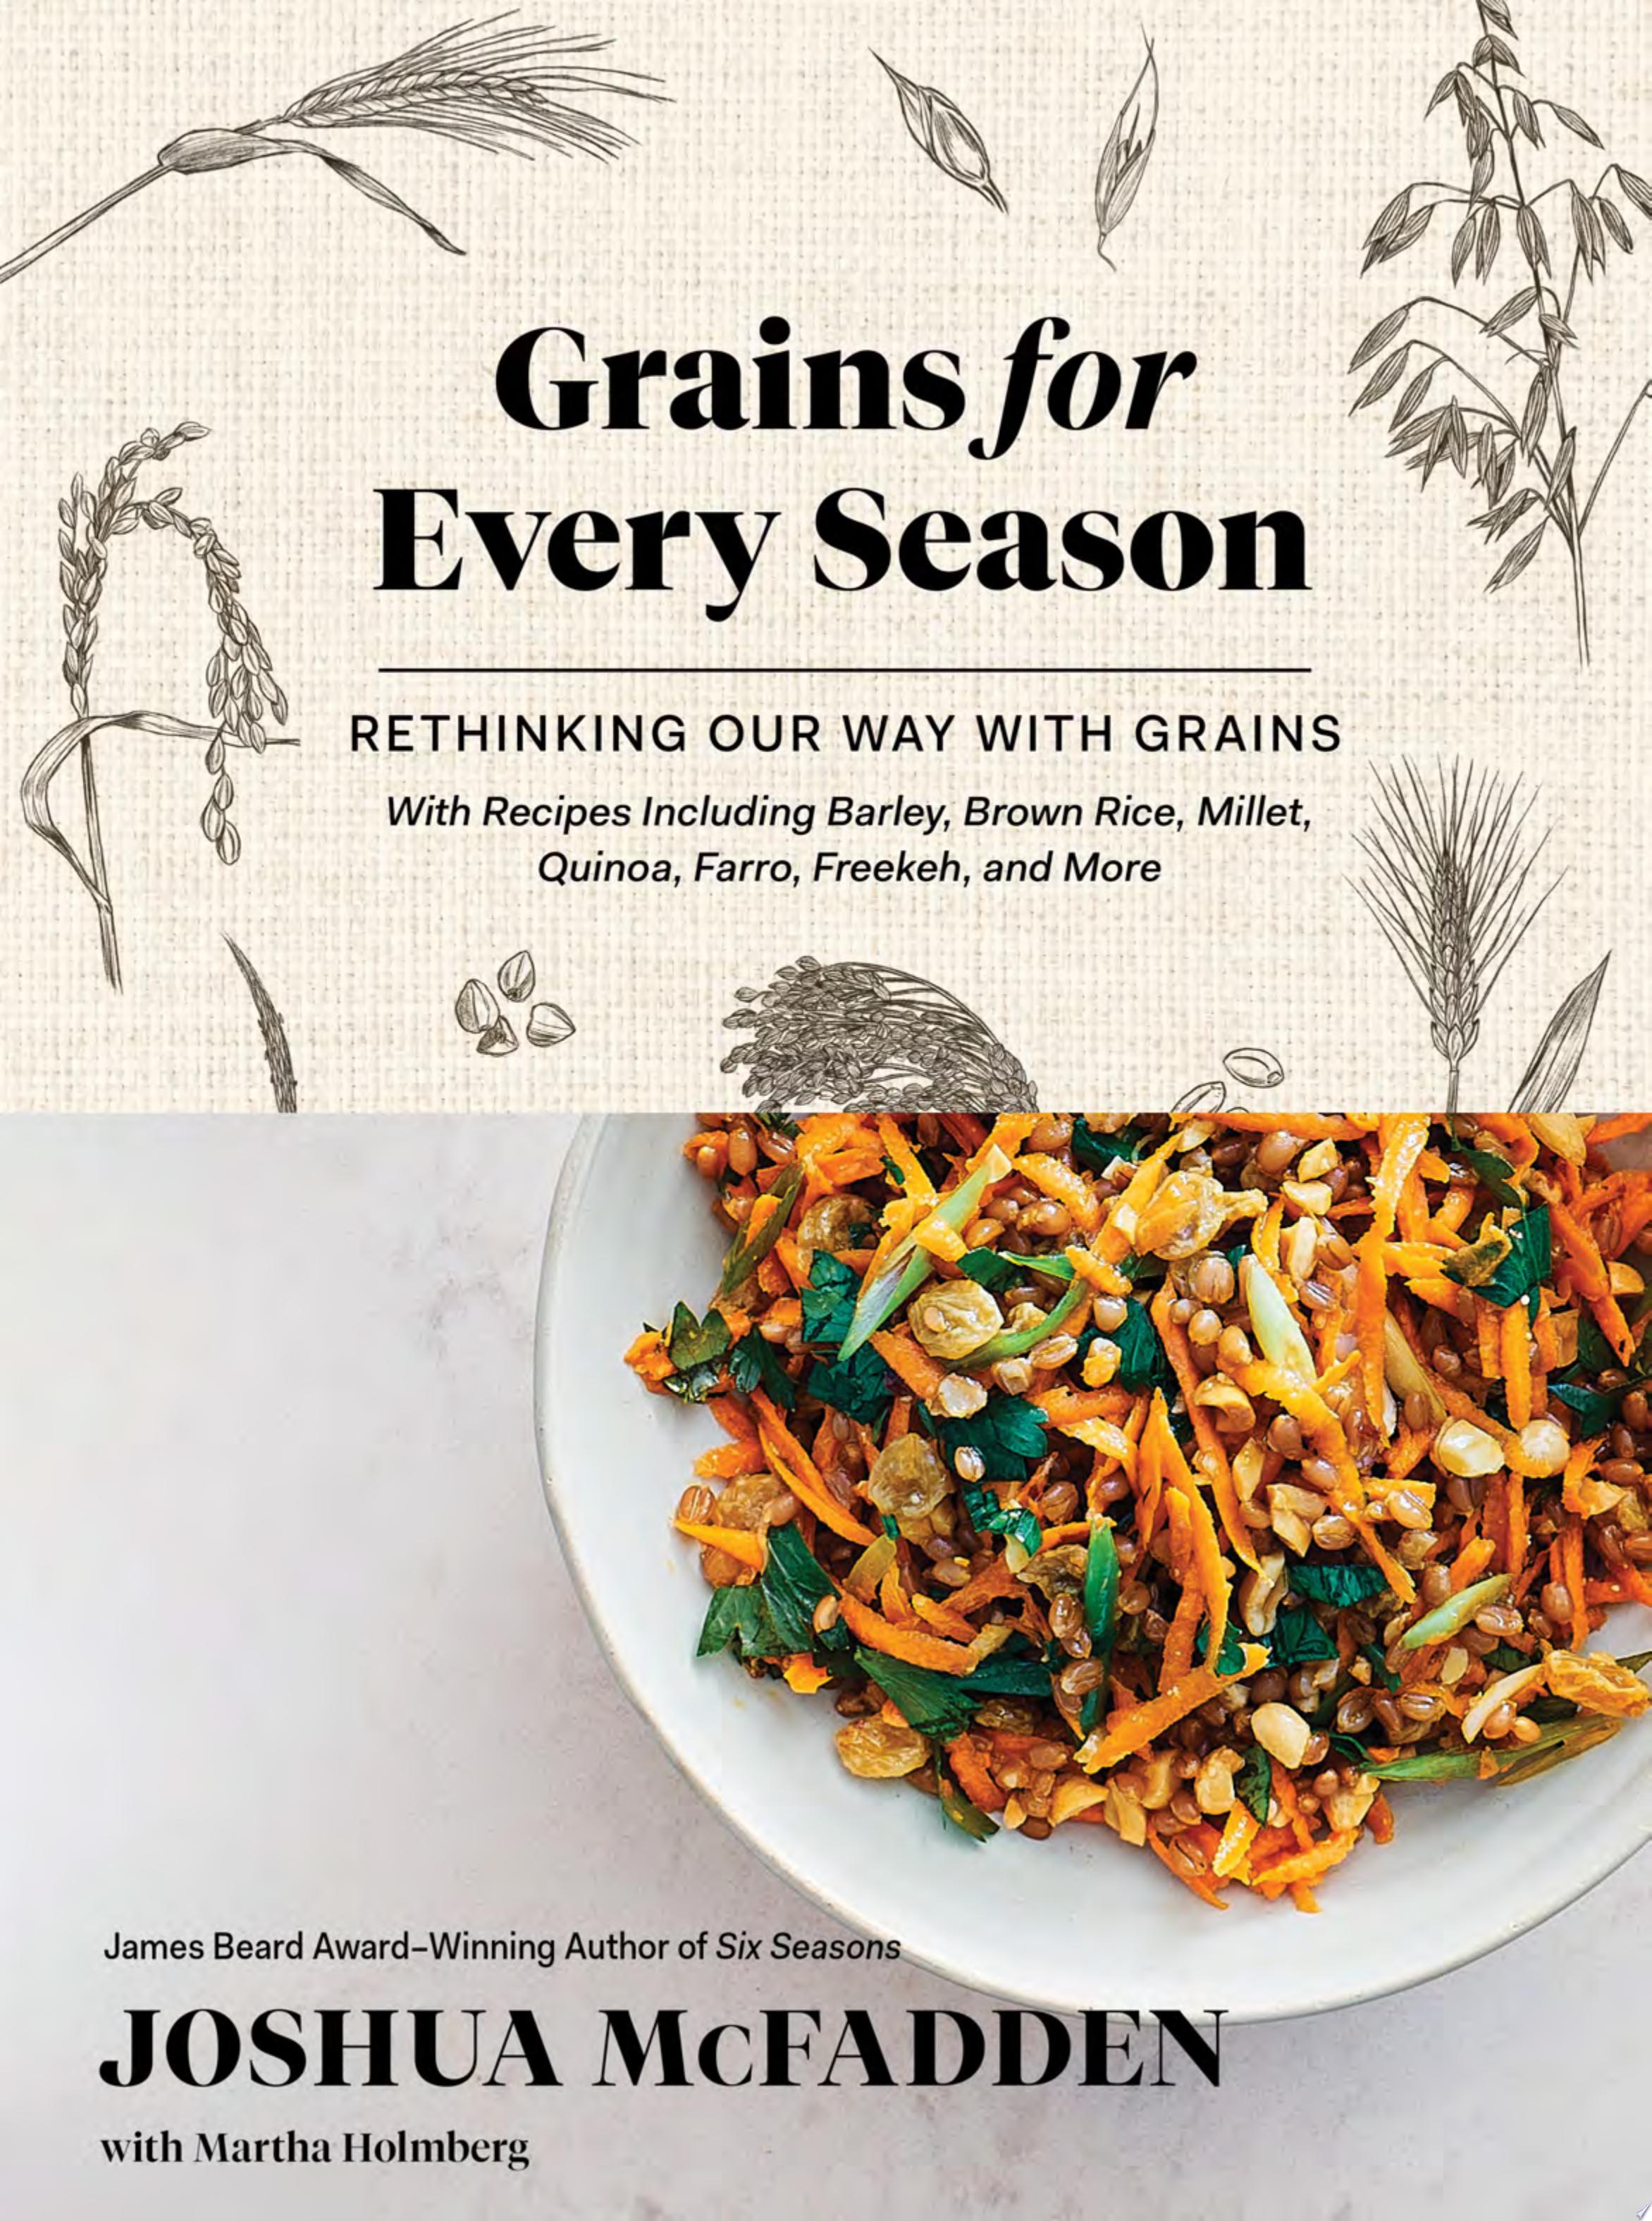 Image for "Grains for Every Season"